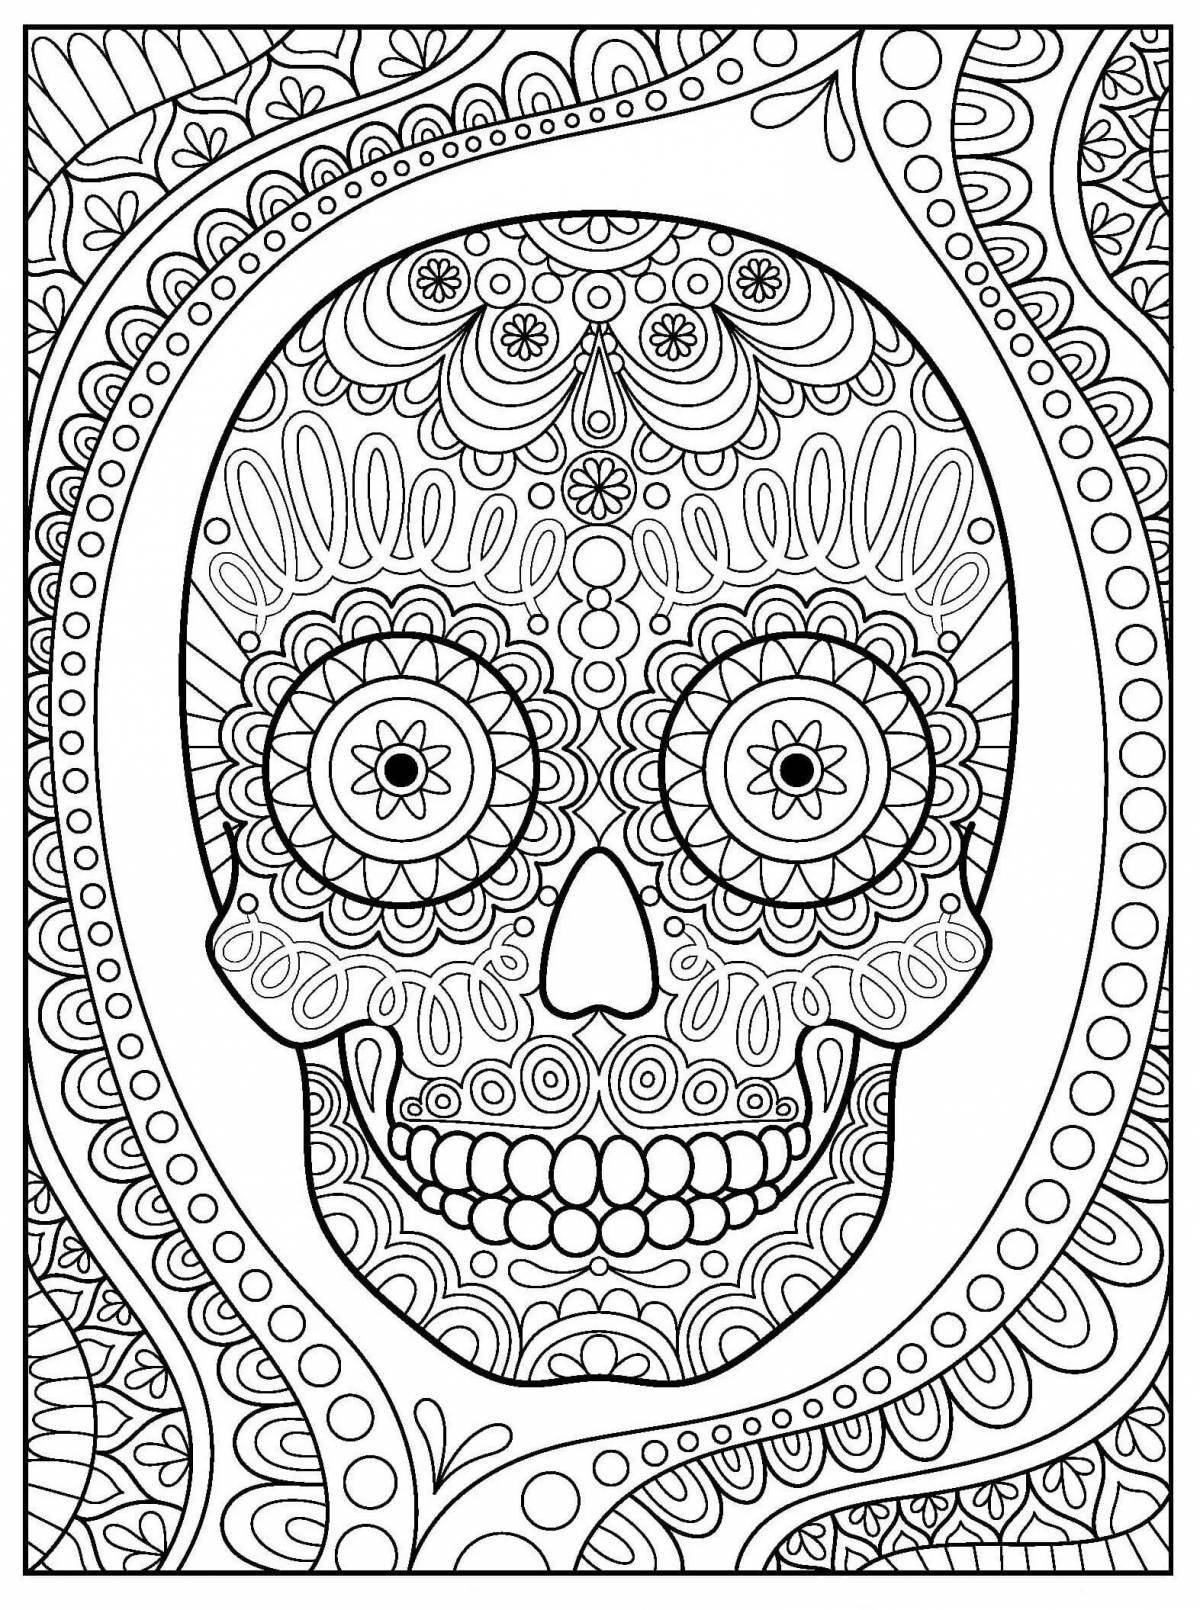 Radiant men antistress coloring page